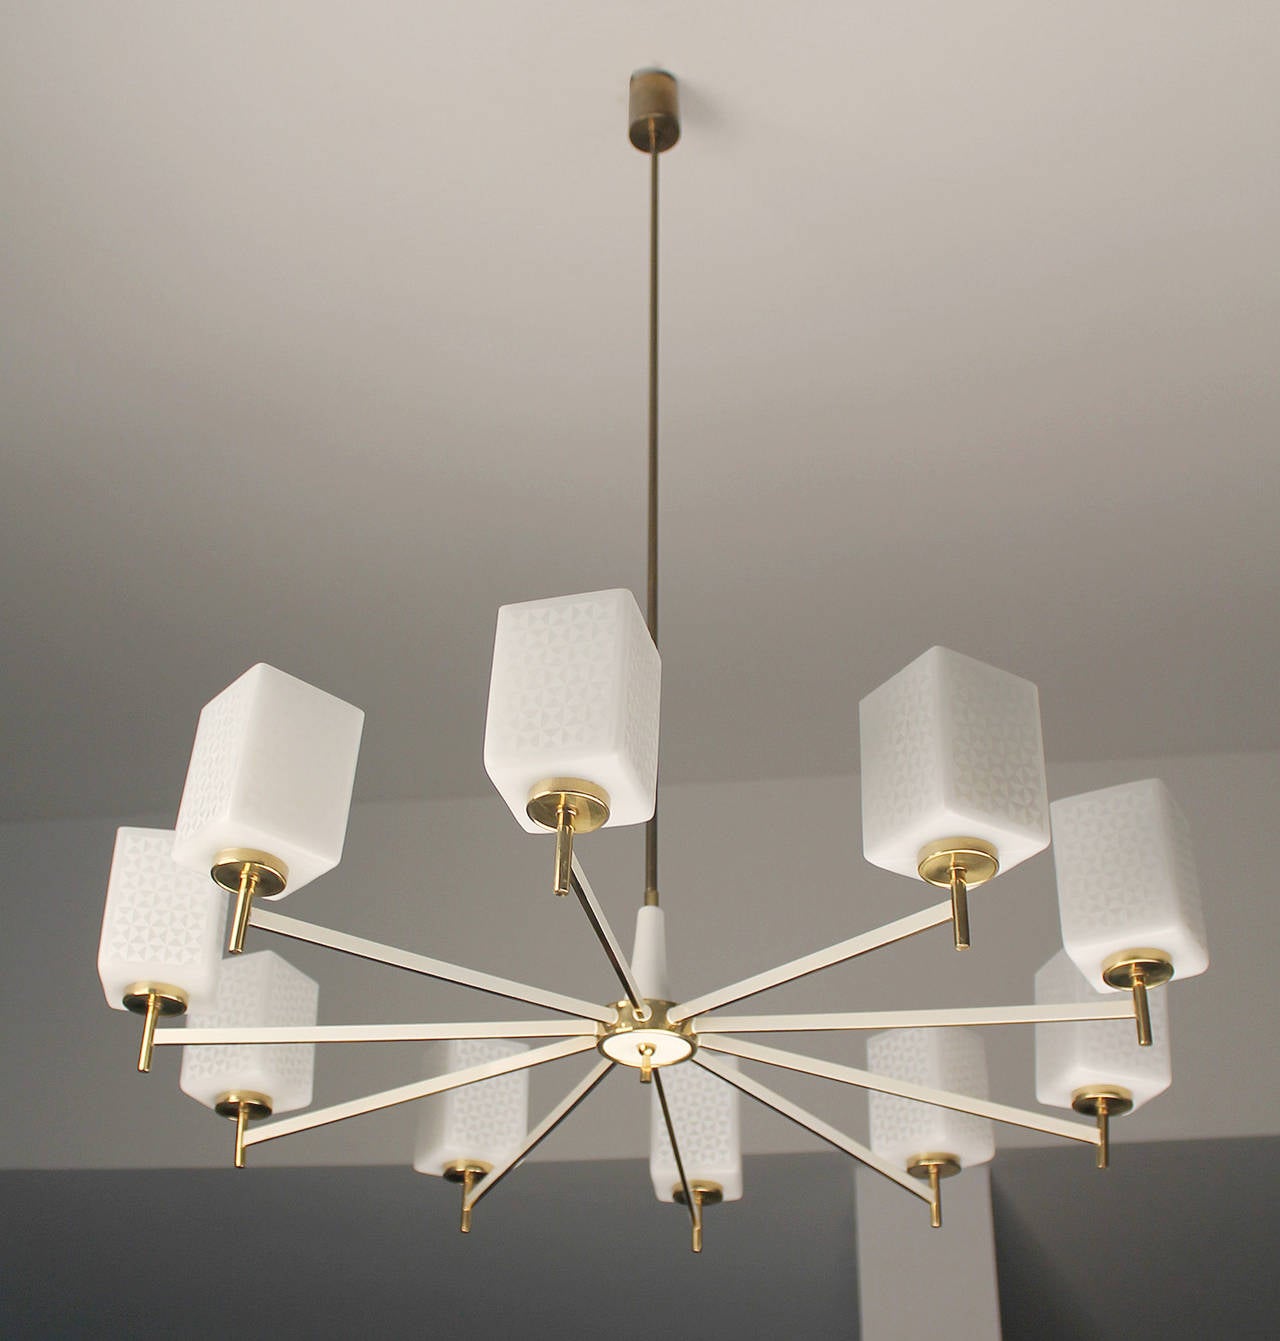 Very large brass and glass sputnik chandelier, opaline glass shades with applied mosaic patterns.

The lamp has been tested under a 220v and 110v environment 
and requires 10 candelabra bulb up to 40 watts each